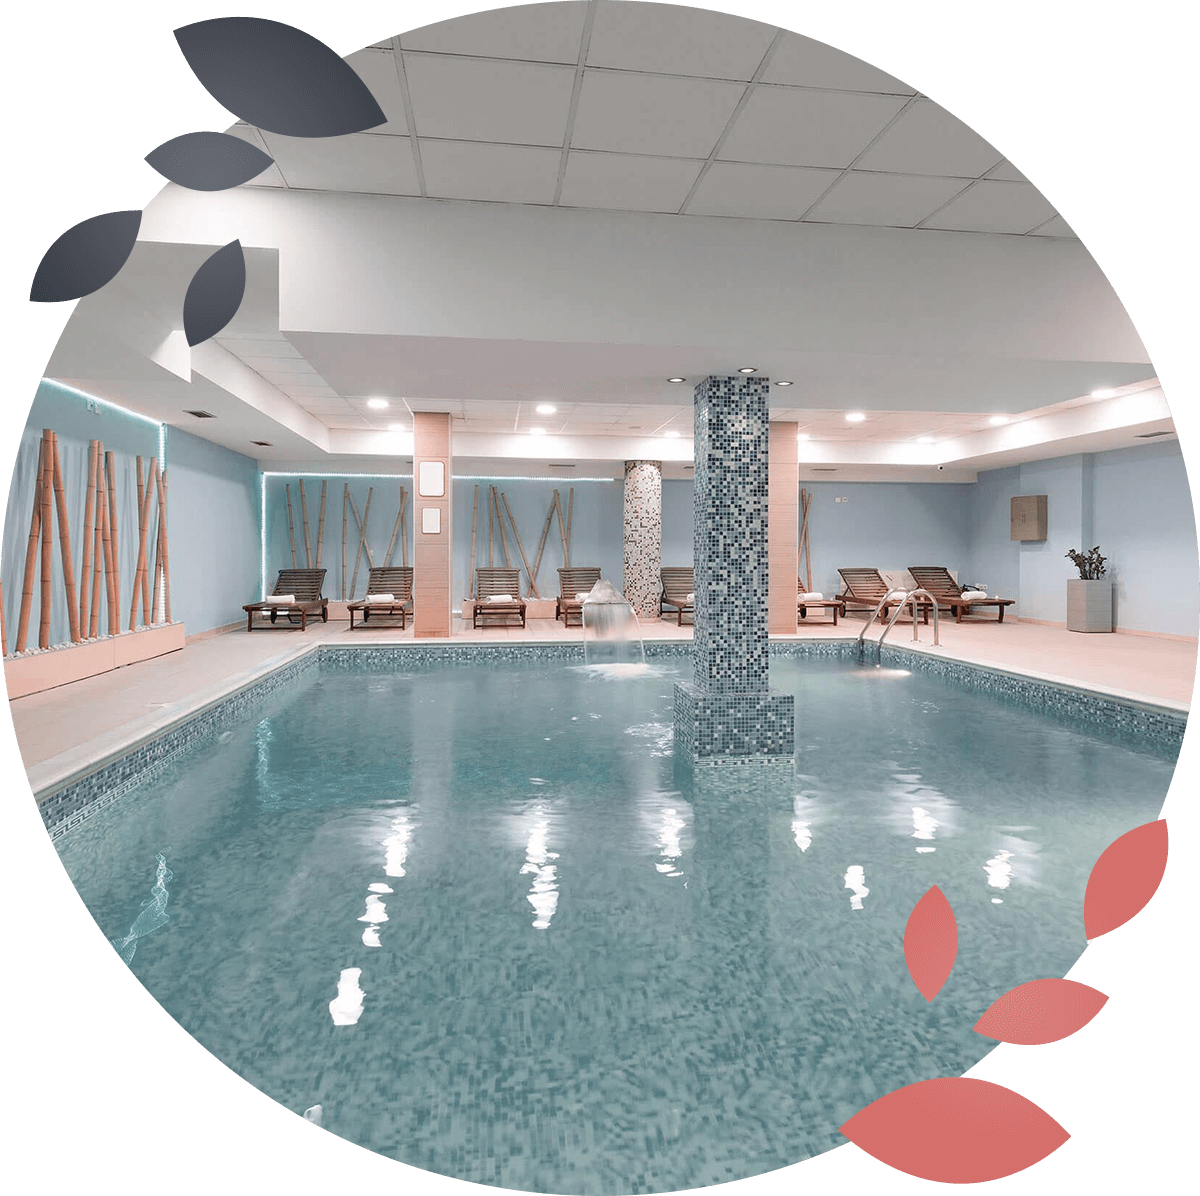 https://edenpart.fr/wp-content/uploads/2019/02/spa-pool-circle.png